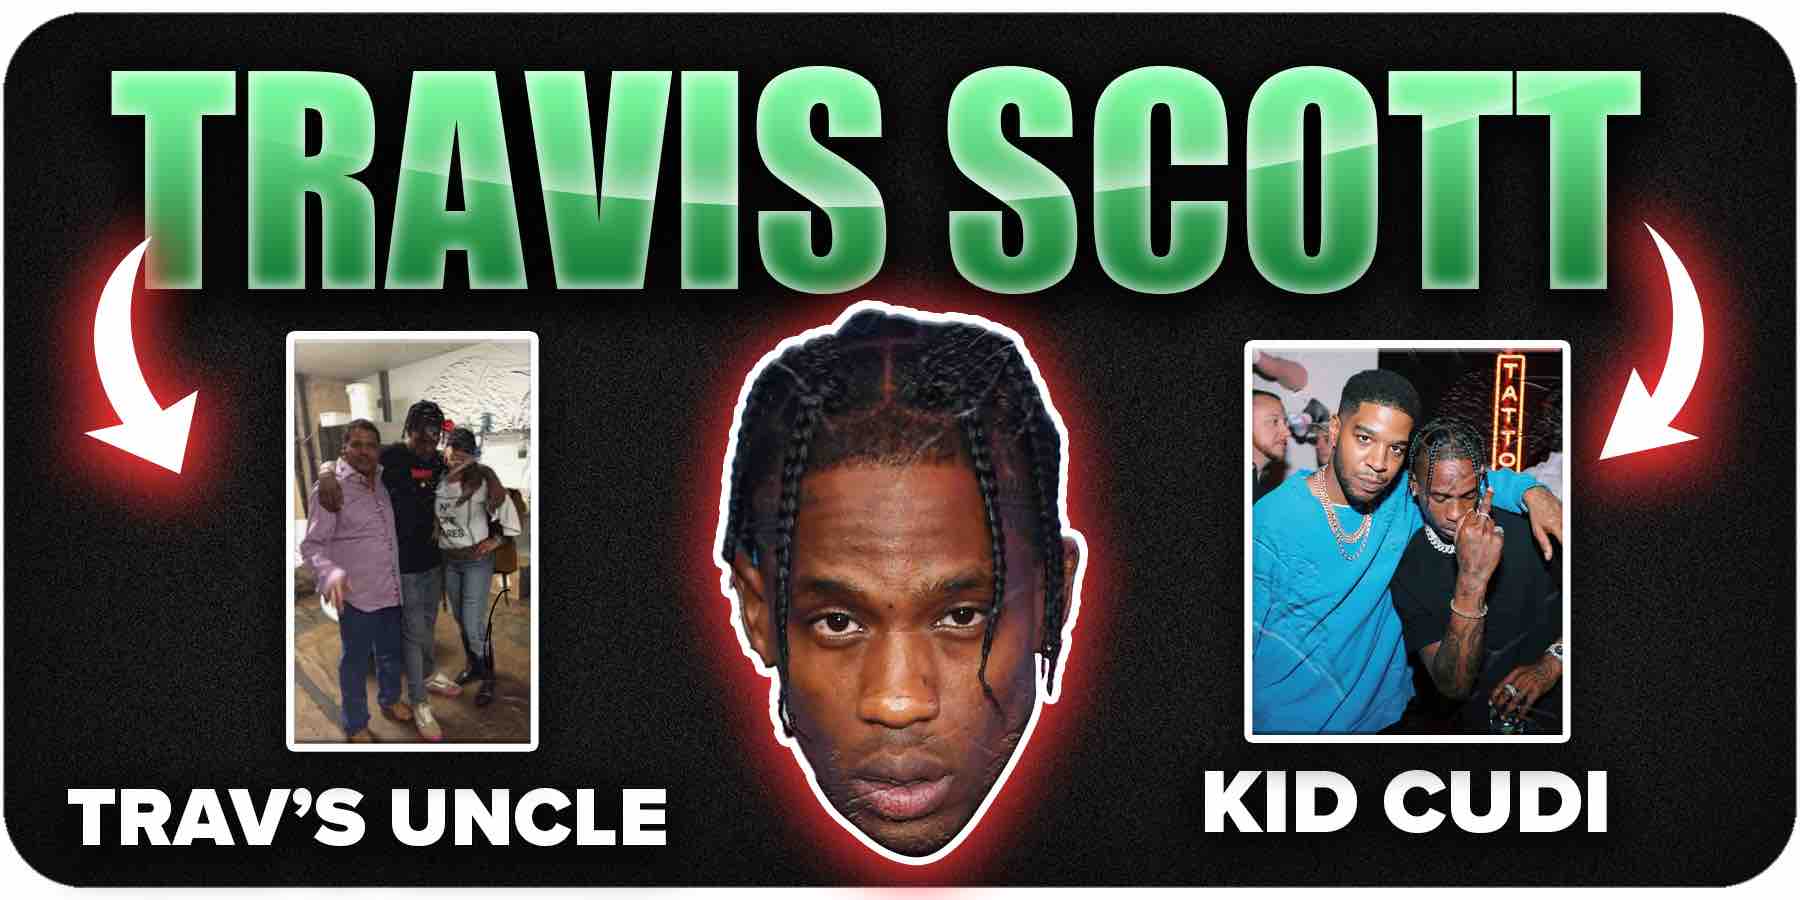 Where did the Travis Scott name come from